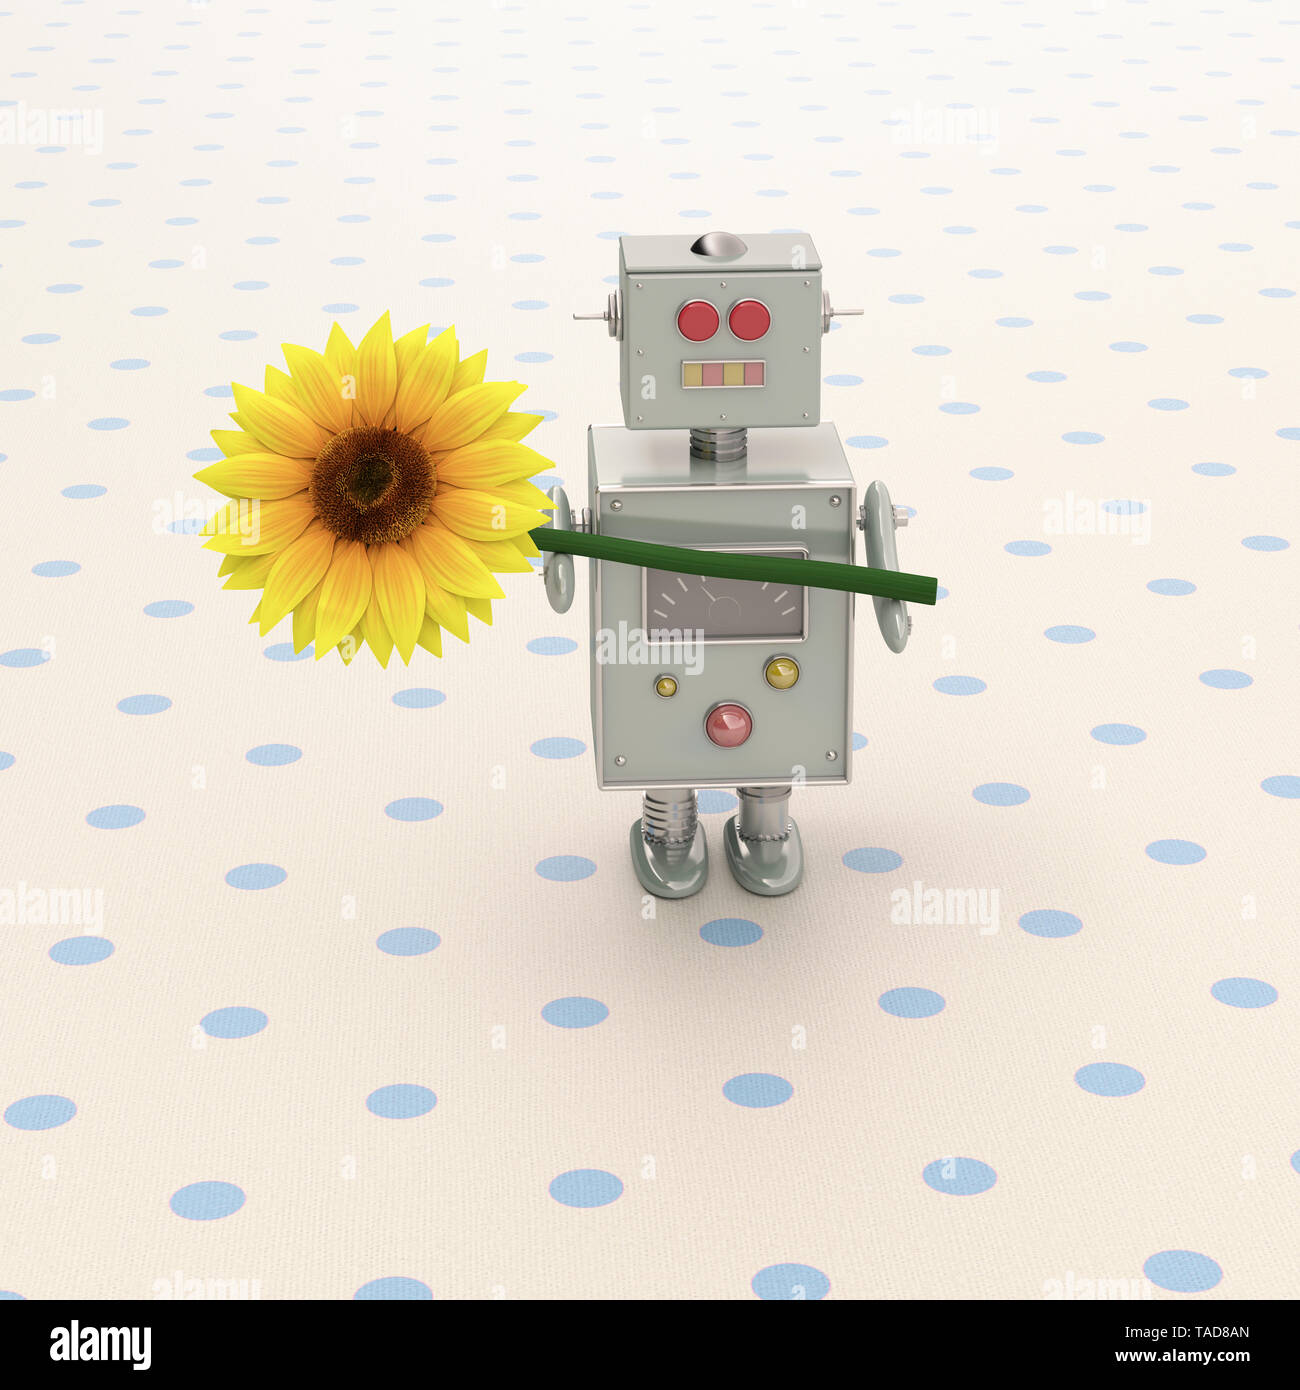 3D rendering, Toy robot presenting a sunflower Stock Photo